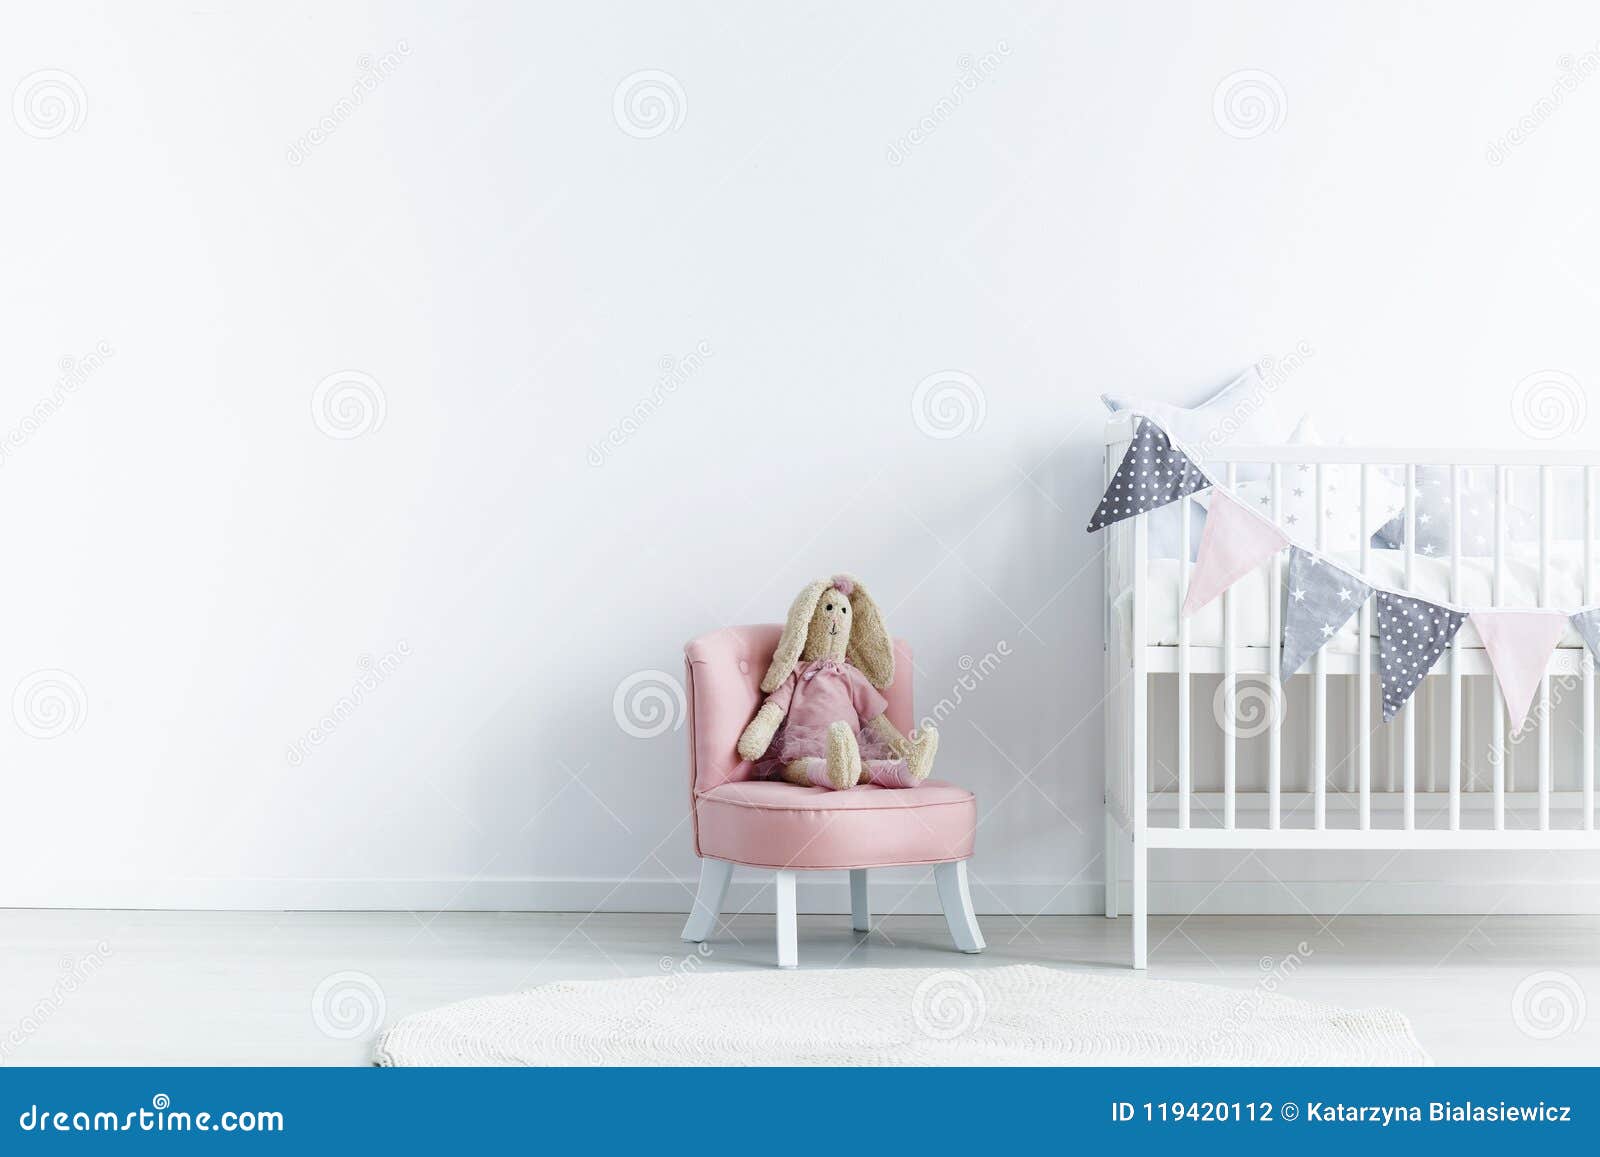 empty wall next a to chair with a rabbit and crib with triangles